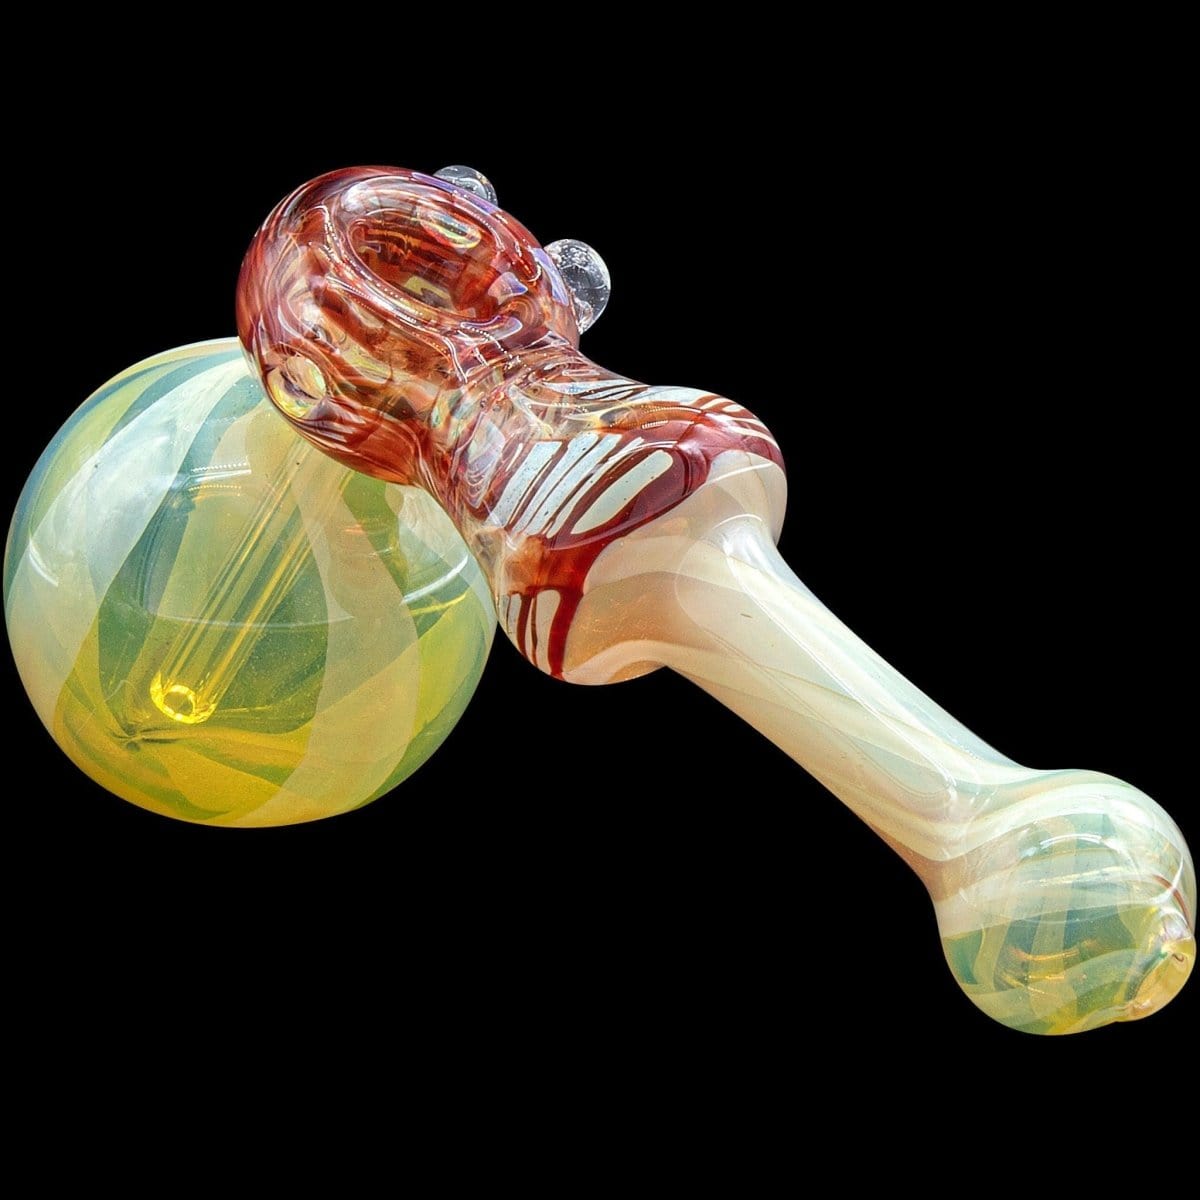 LA Pipes Bubbler Ruby Red "Raked Hammer" Fumed Hammer Bubbler Pipe (Various Colors)